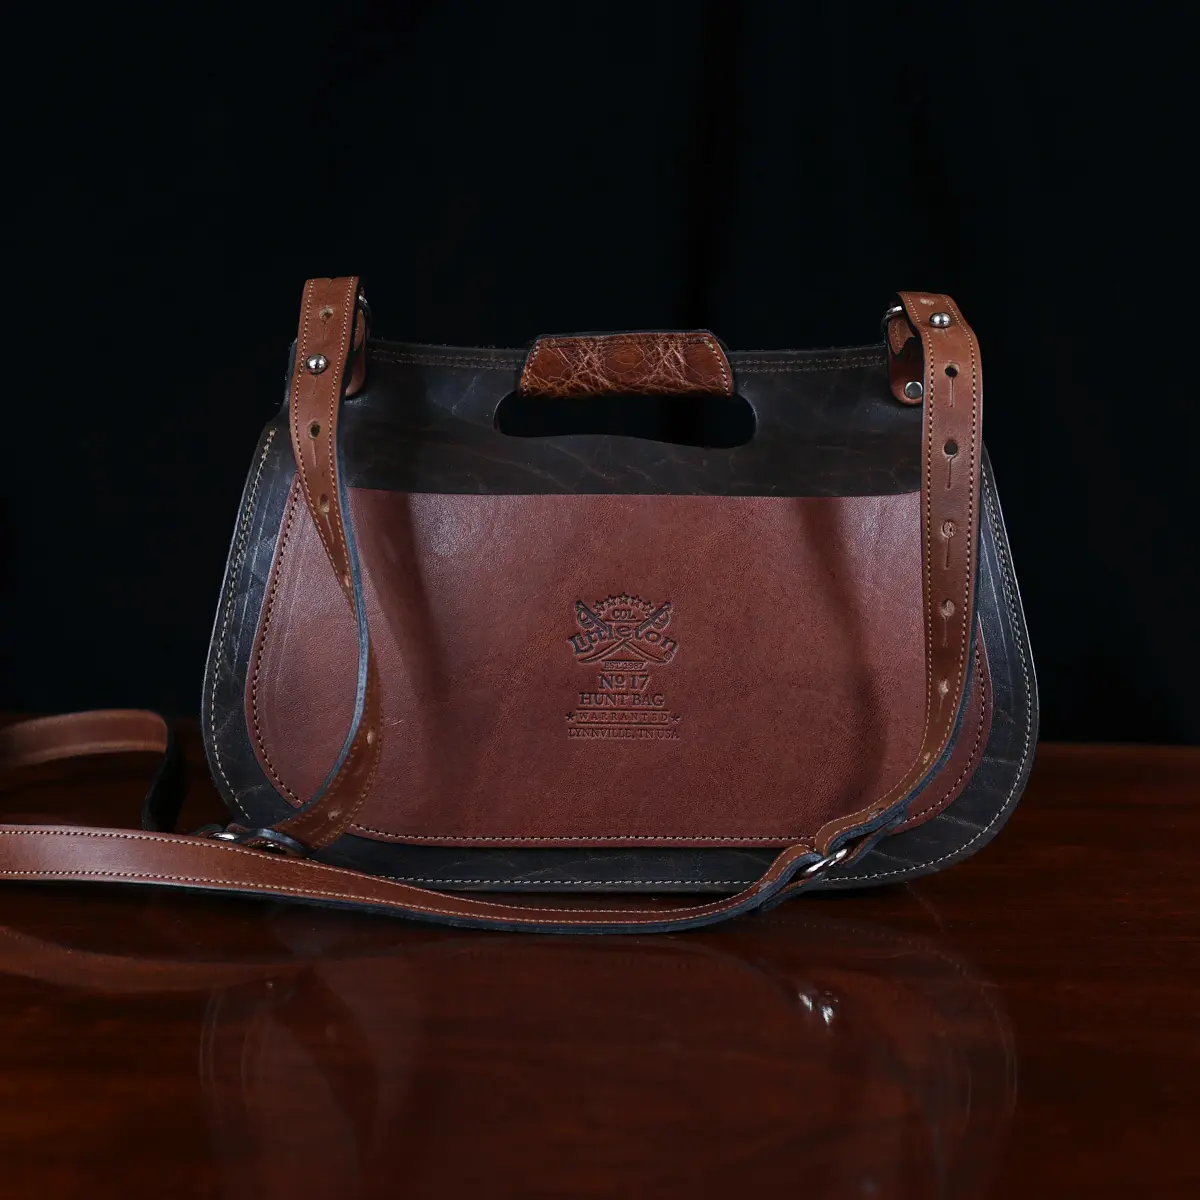 No. 17 Hunt Bag ladies' crossbody in Tobacco Brown American Buffalo and trimmed with American Alligator and Vintage Brown American Steerhide - back view